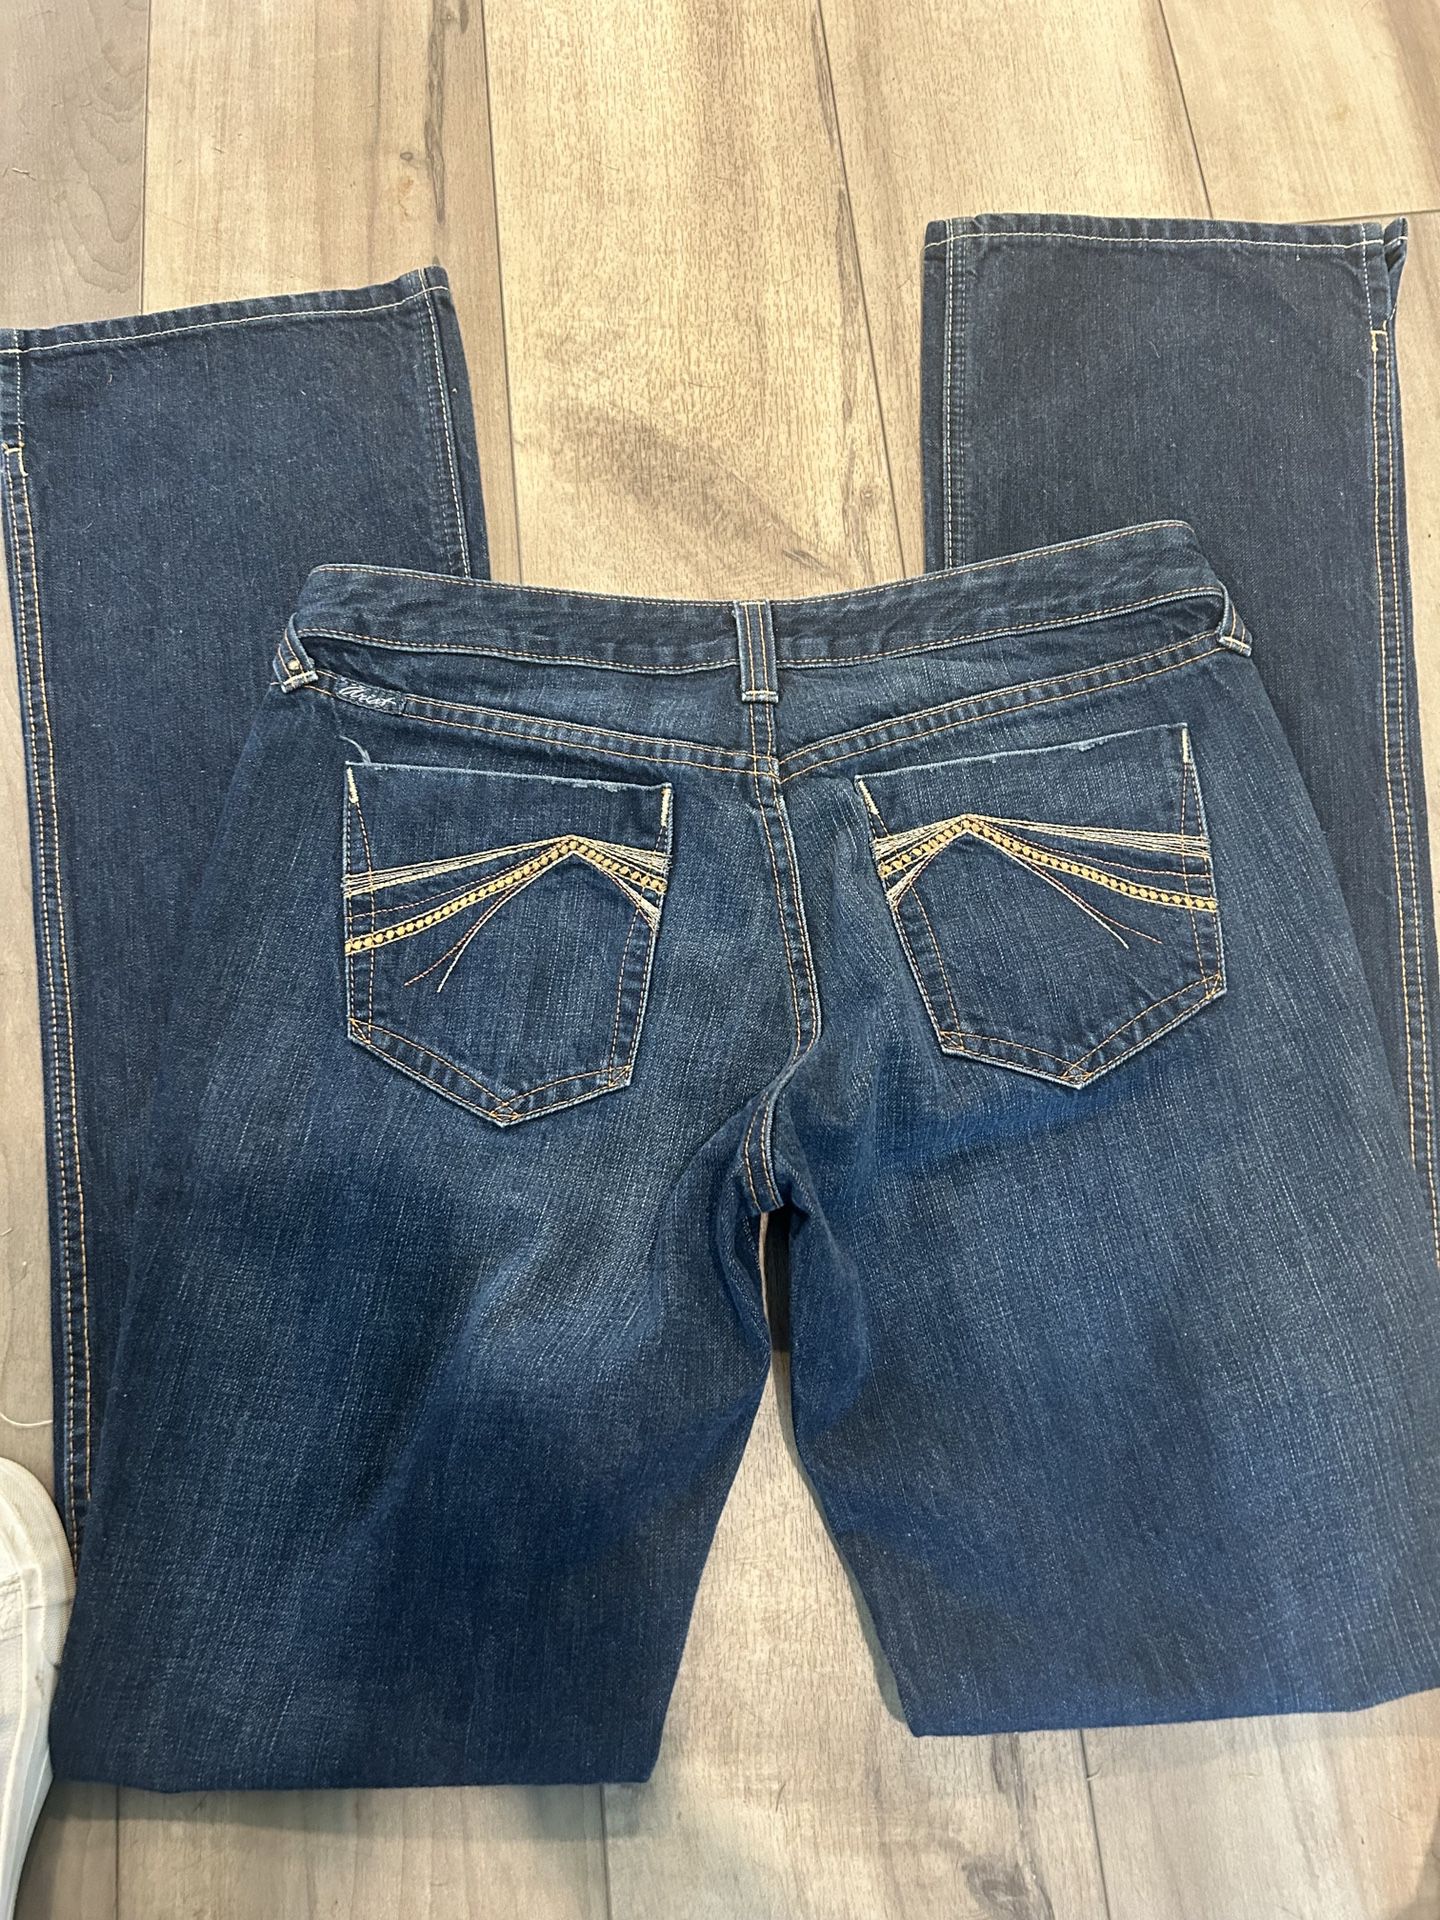 Ariat Women’s Jeans XL31 for Sale in Crowley, TX - OfferUp